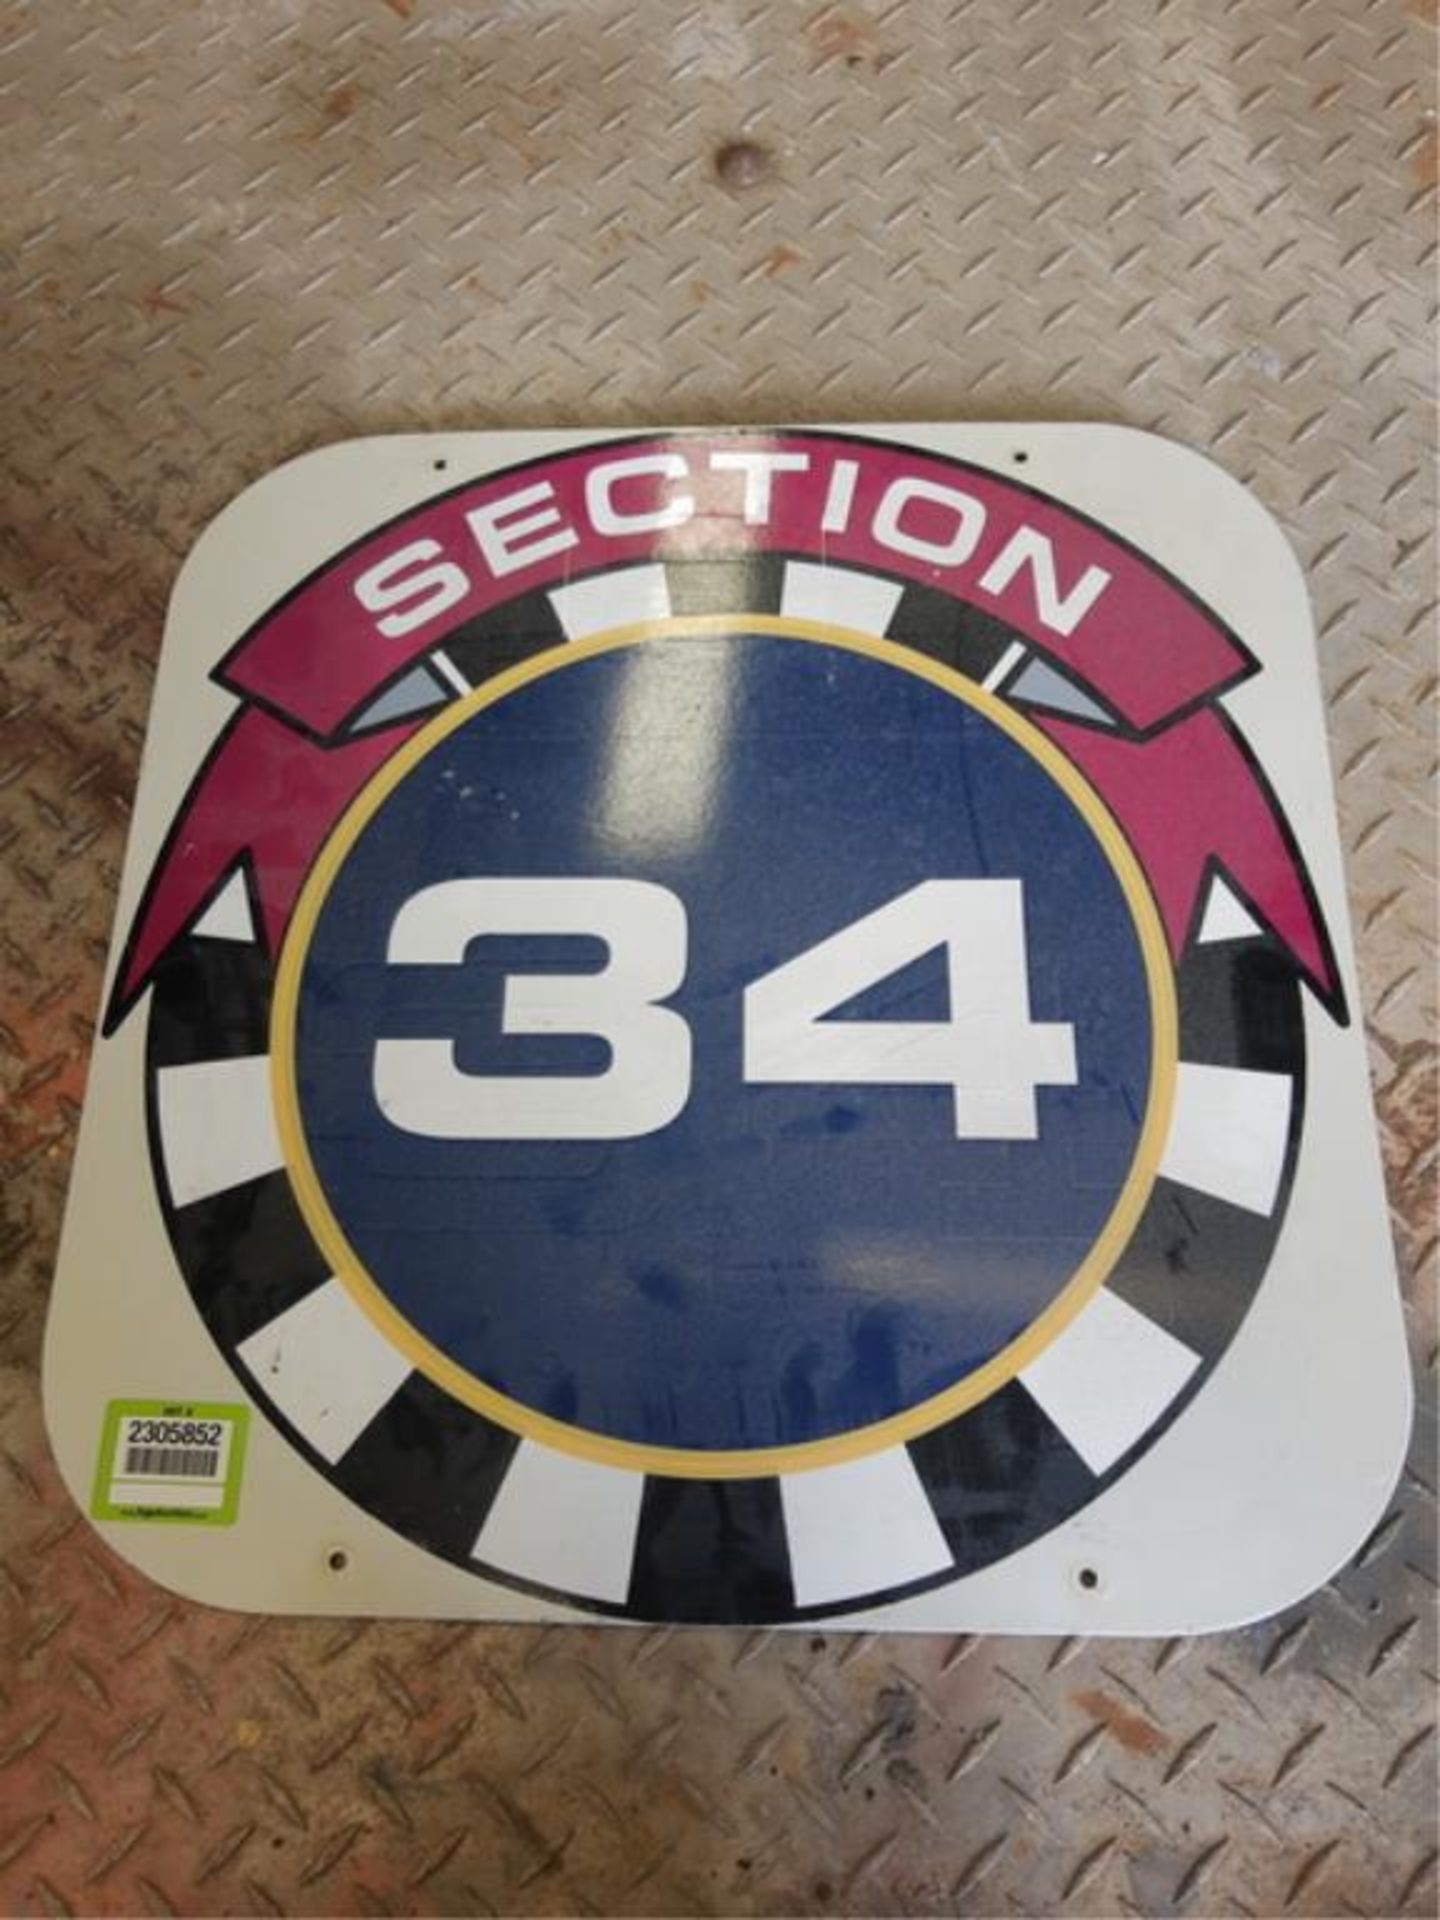 Section 34 Sign